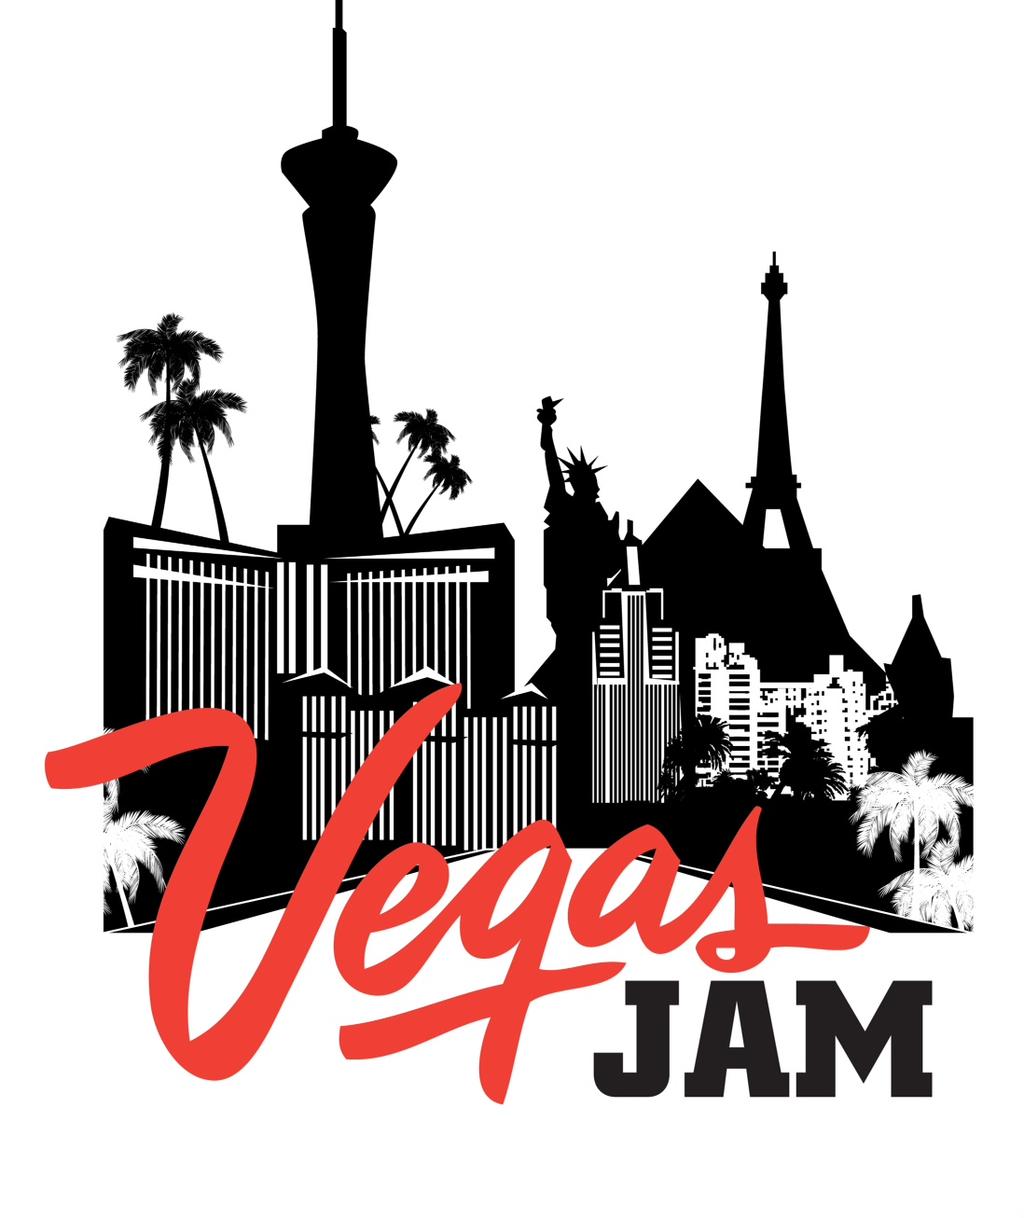 We Welcome You to our 9 th Annual Vegas Jam National Dance Convention Weekend.